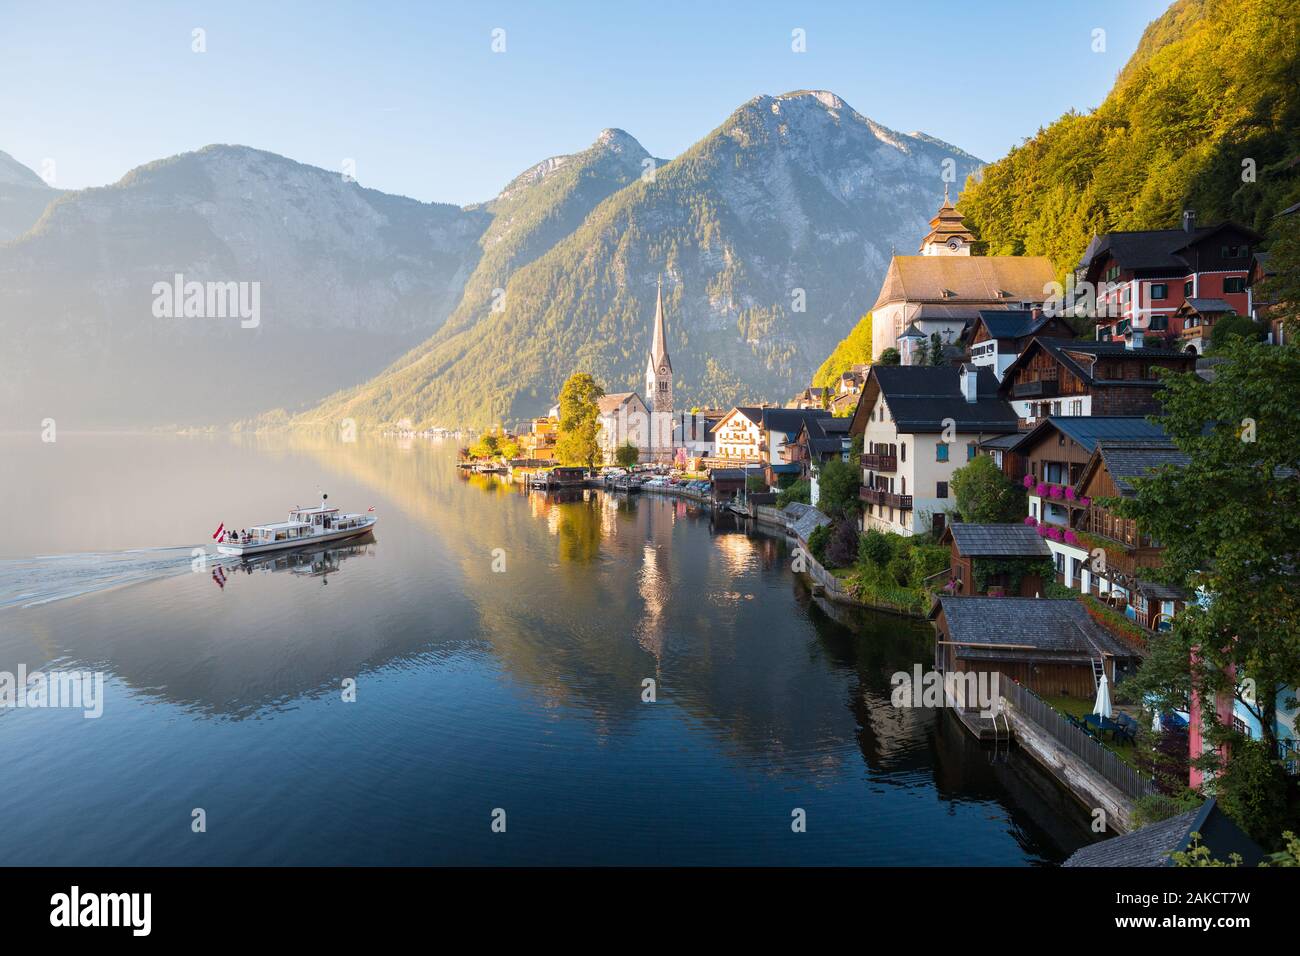 Classic postcard view of famous Hallstatt lakeside town in the Alps with traditional passenger ship in early morning light at sunrise on a beautiful d Stock Photo